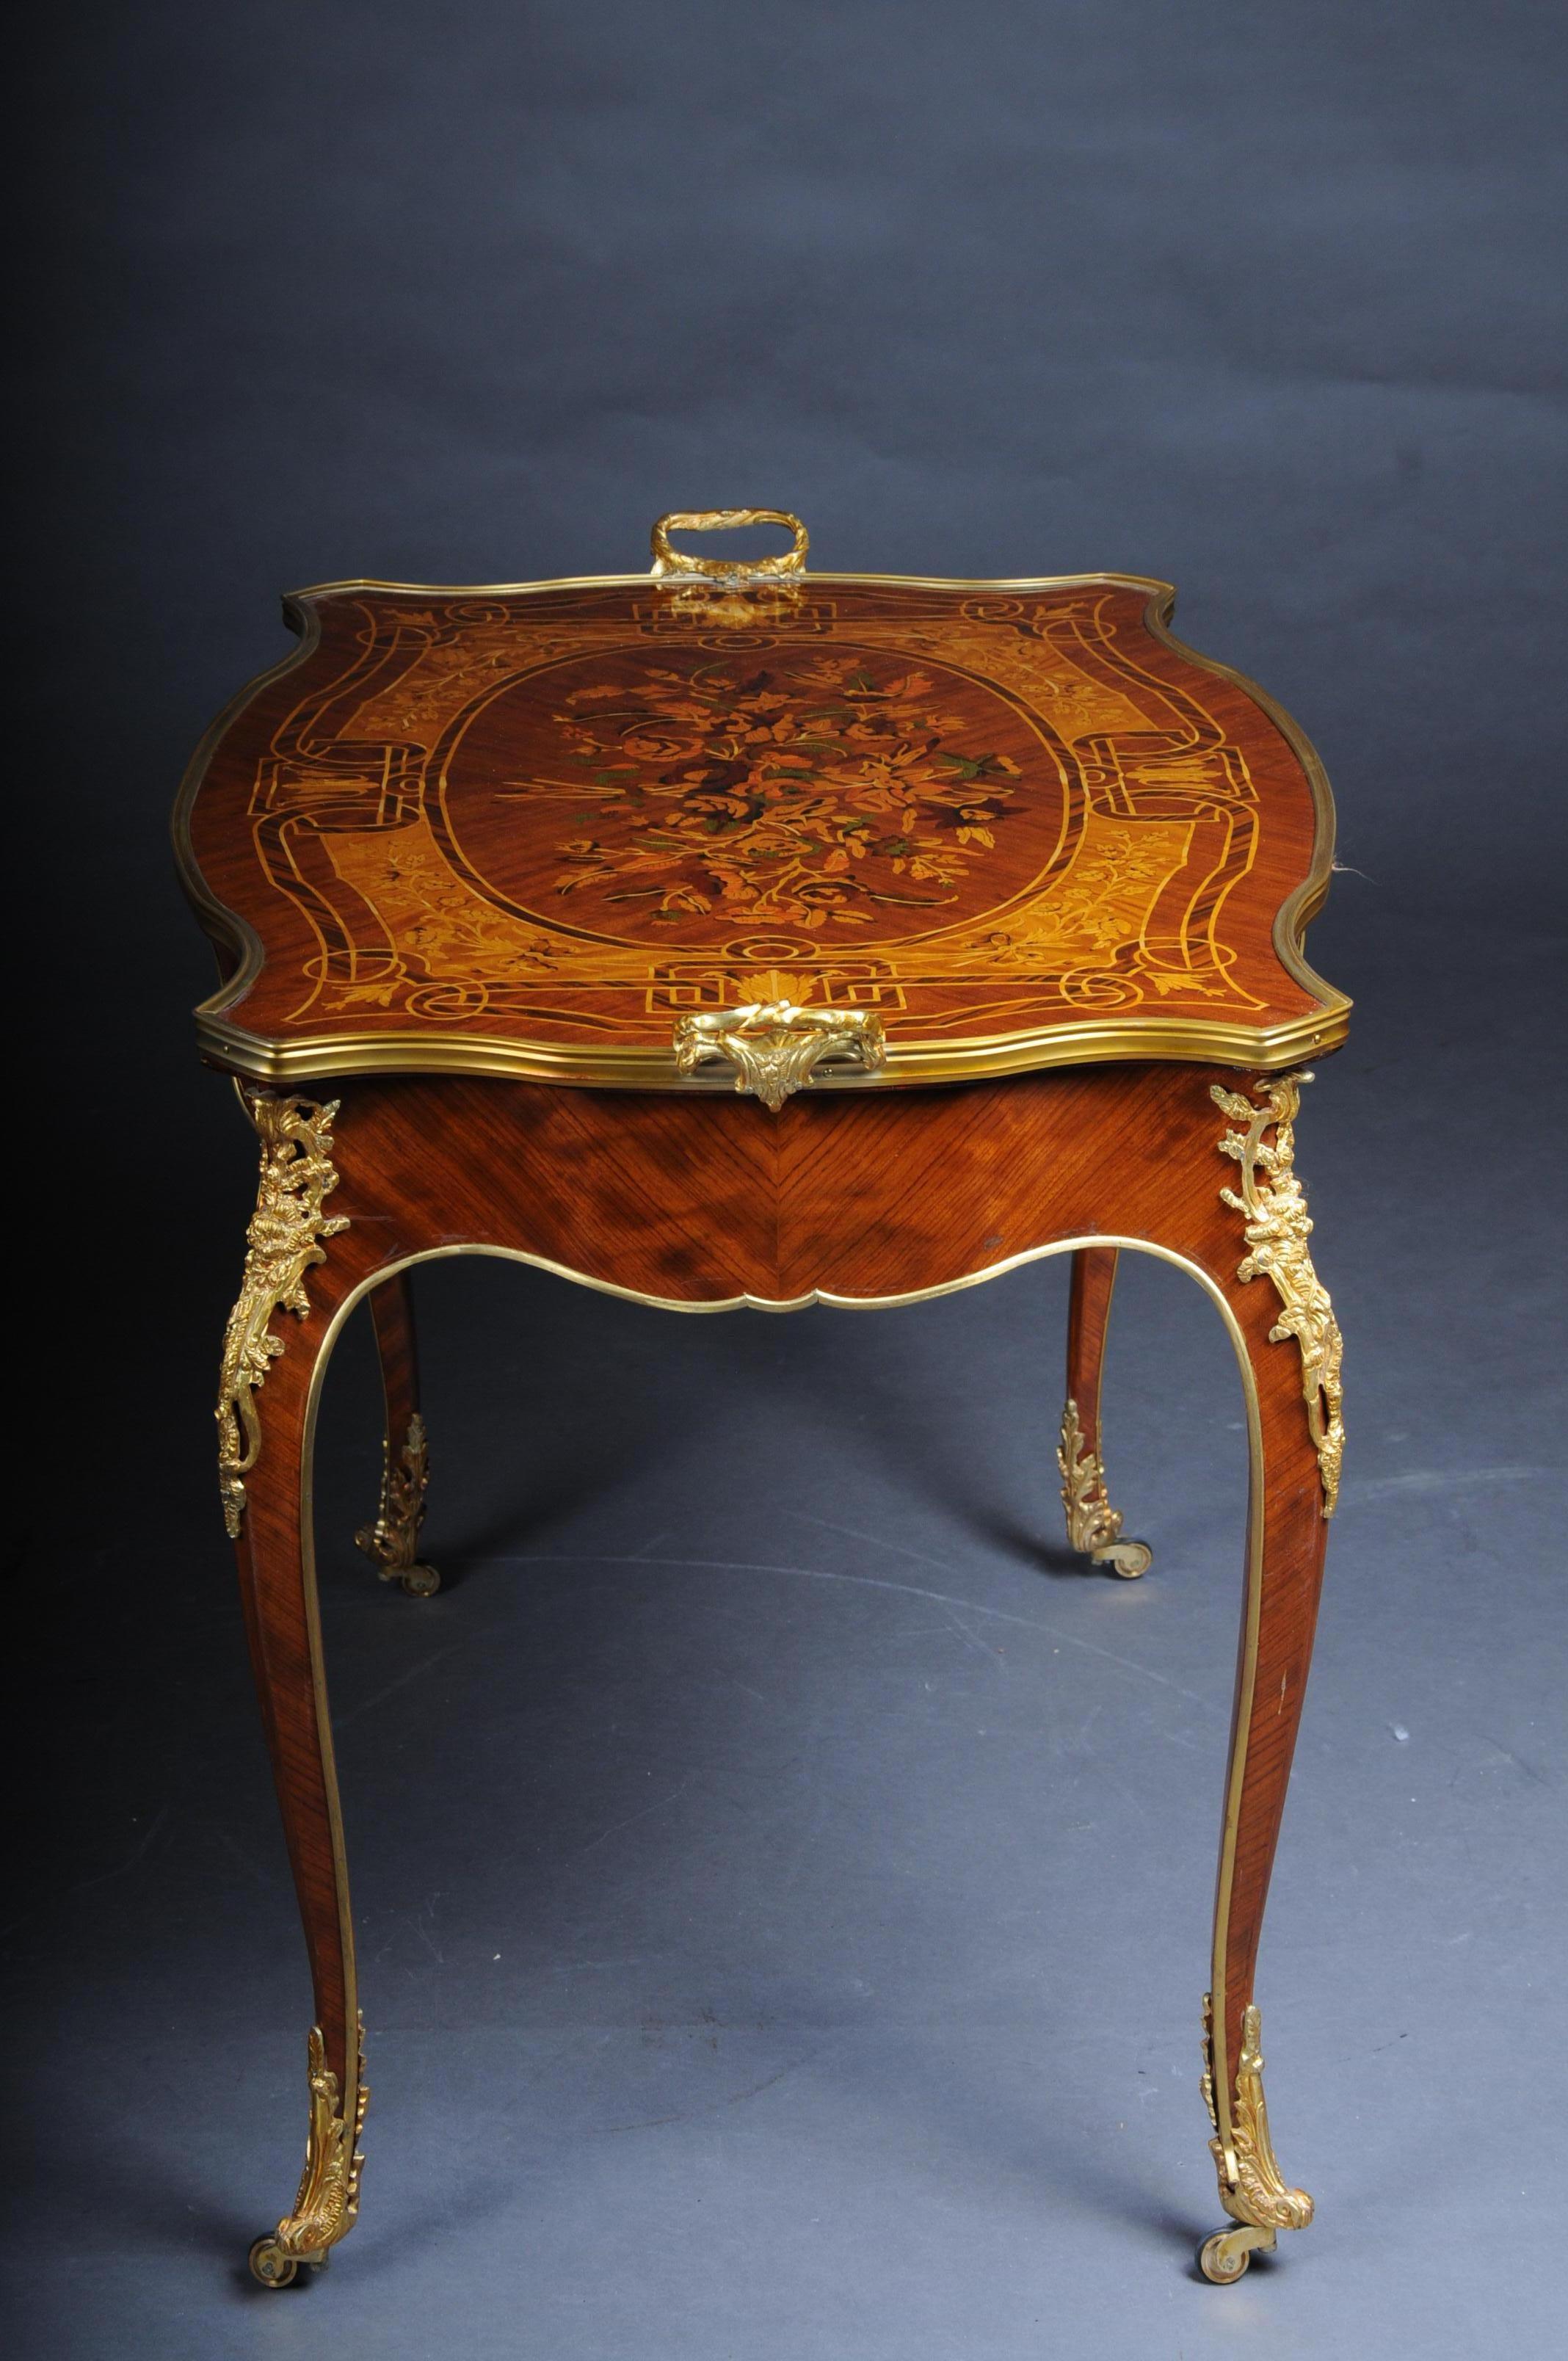 20th Century Elegant French Salon Table in Louis Quinze Style